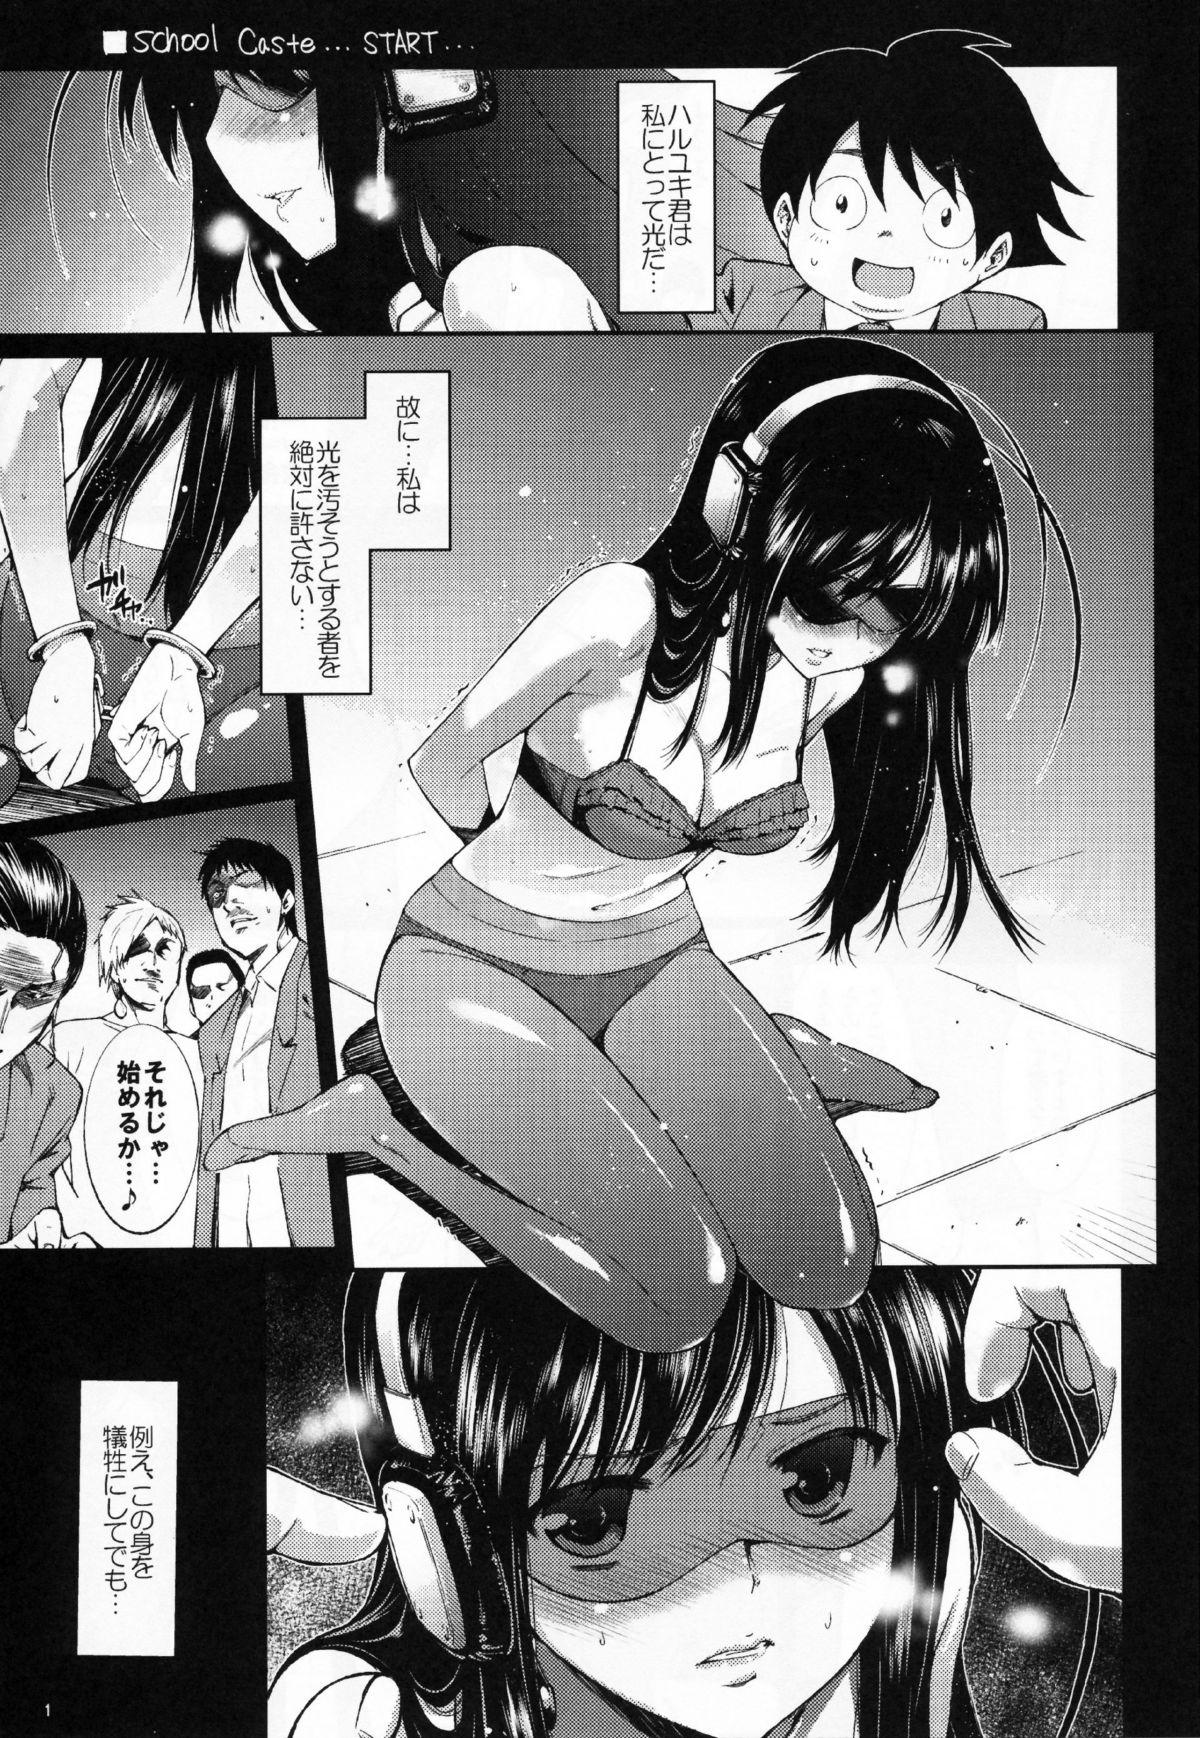 Sucking Cock SCHOOL CASTE - Accel world Chastity - Page 3